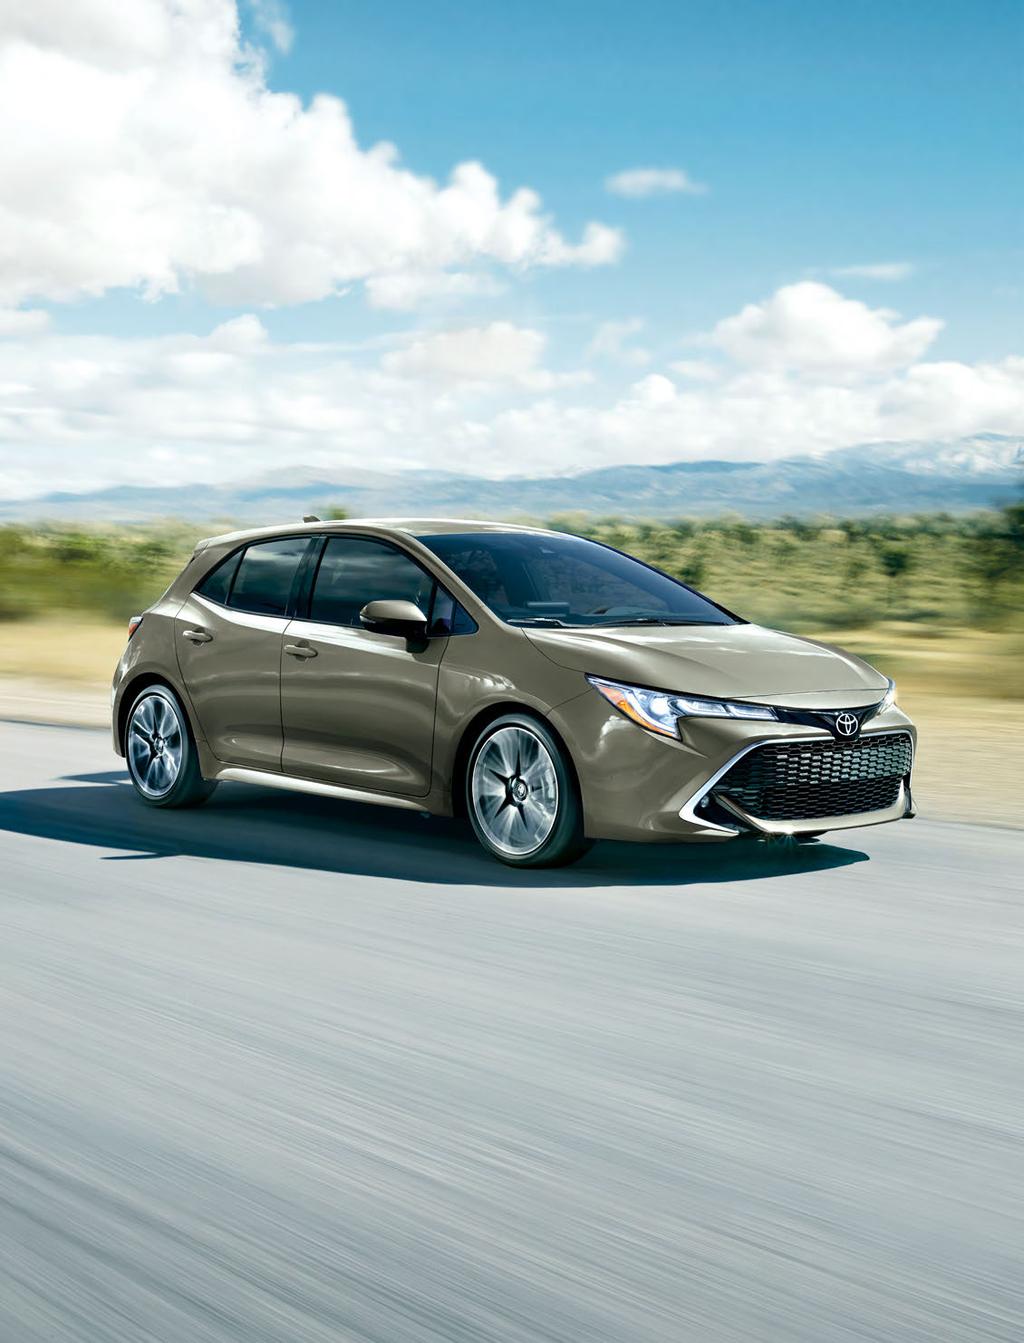 ENERGY THAT S CONTAGIOUS SHIFT INTO THE MOMENT. Corolla Hatchback s new Dynamic Force 2.